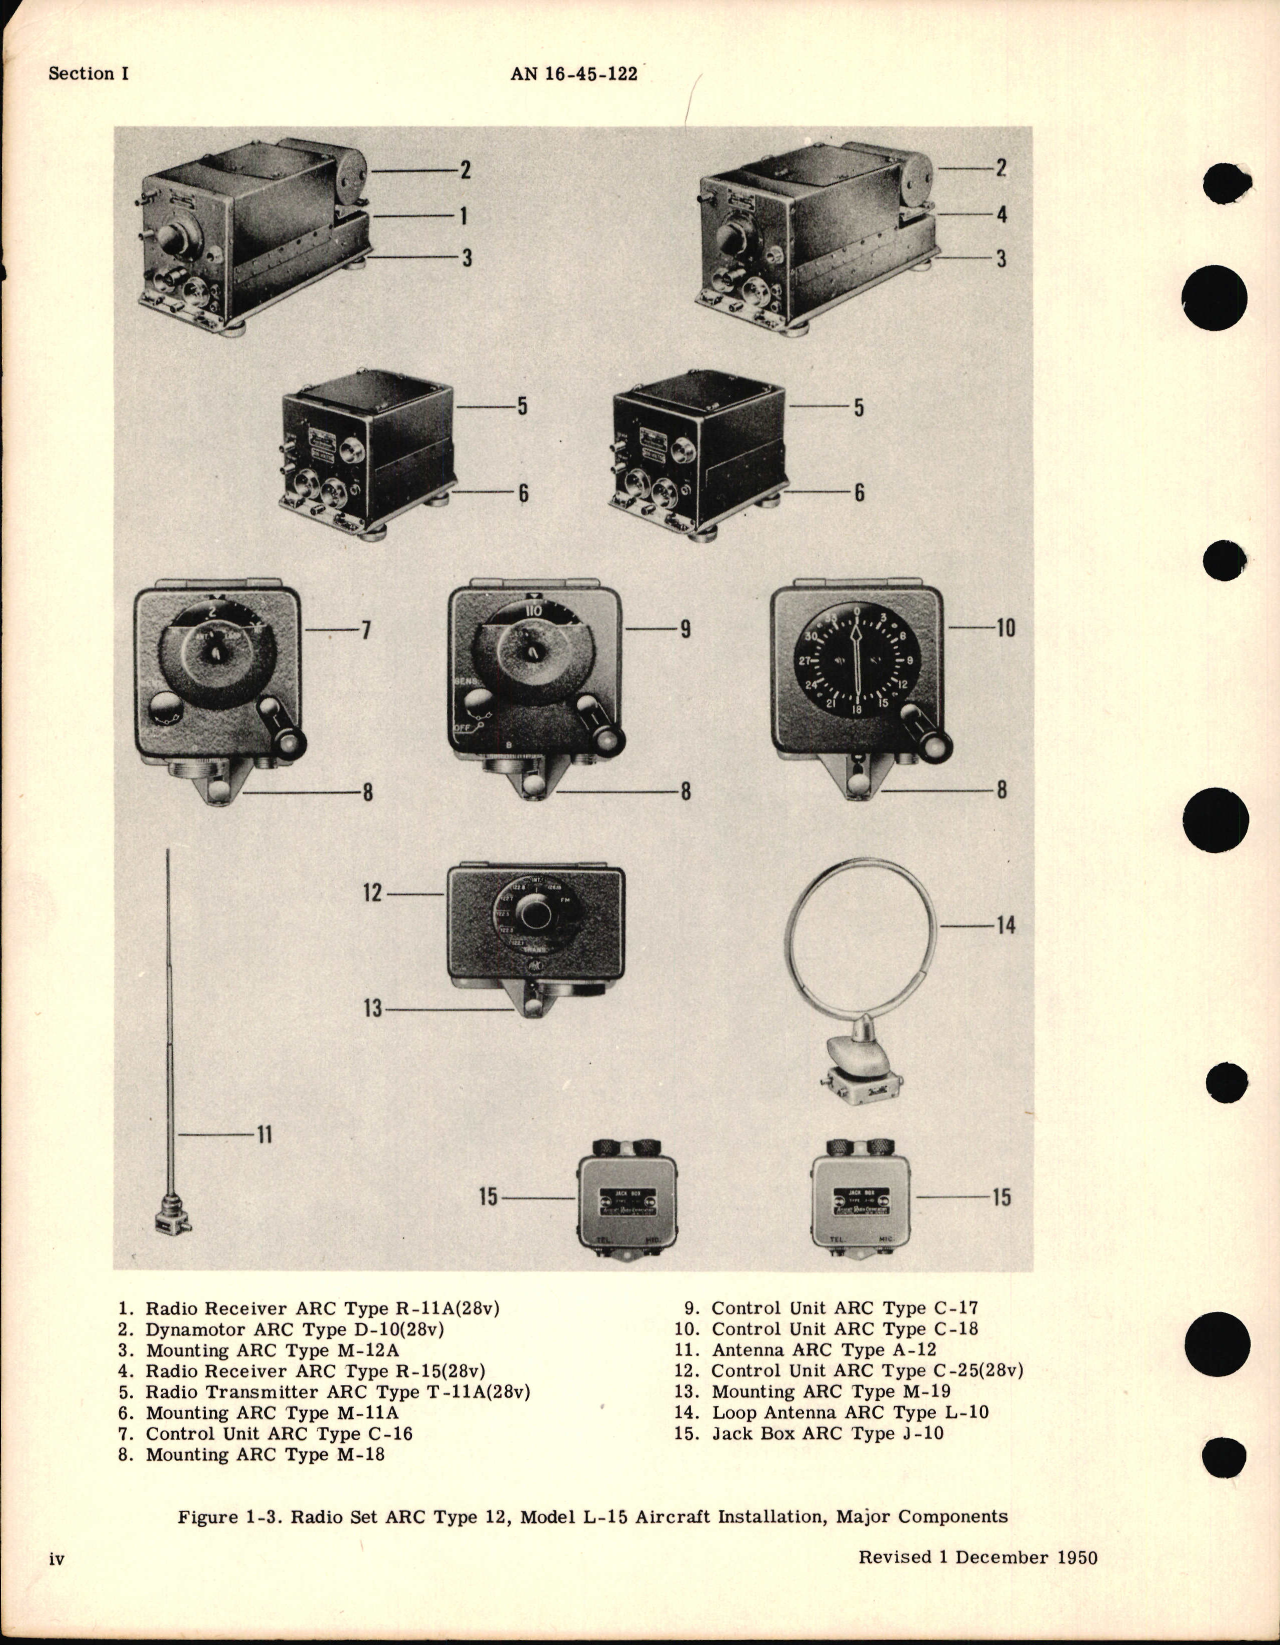 Sample page 8 from AirCorps Library document: Maintenance Instructions for Radio Set ARC Type 12